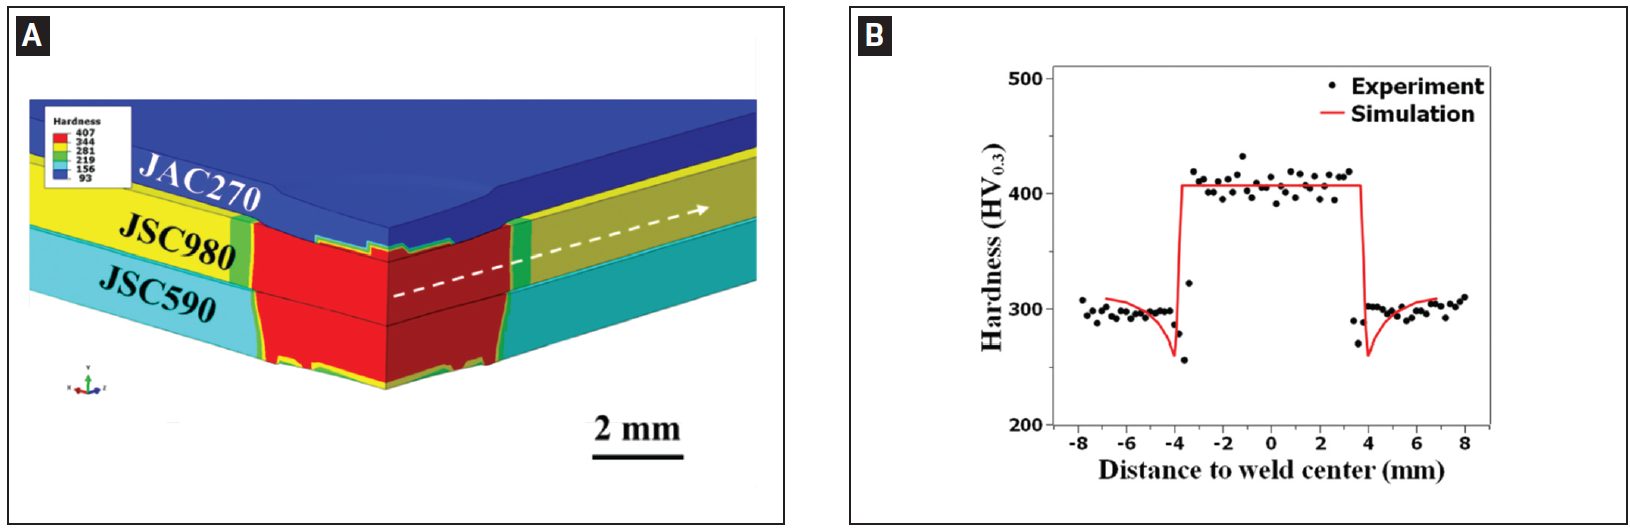 Figure 7: A) Predicted hardness map of resistance spot welded 3T stack-up; B) predicted and measured hardness profiles along the line marked in (A) for JSC 980.